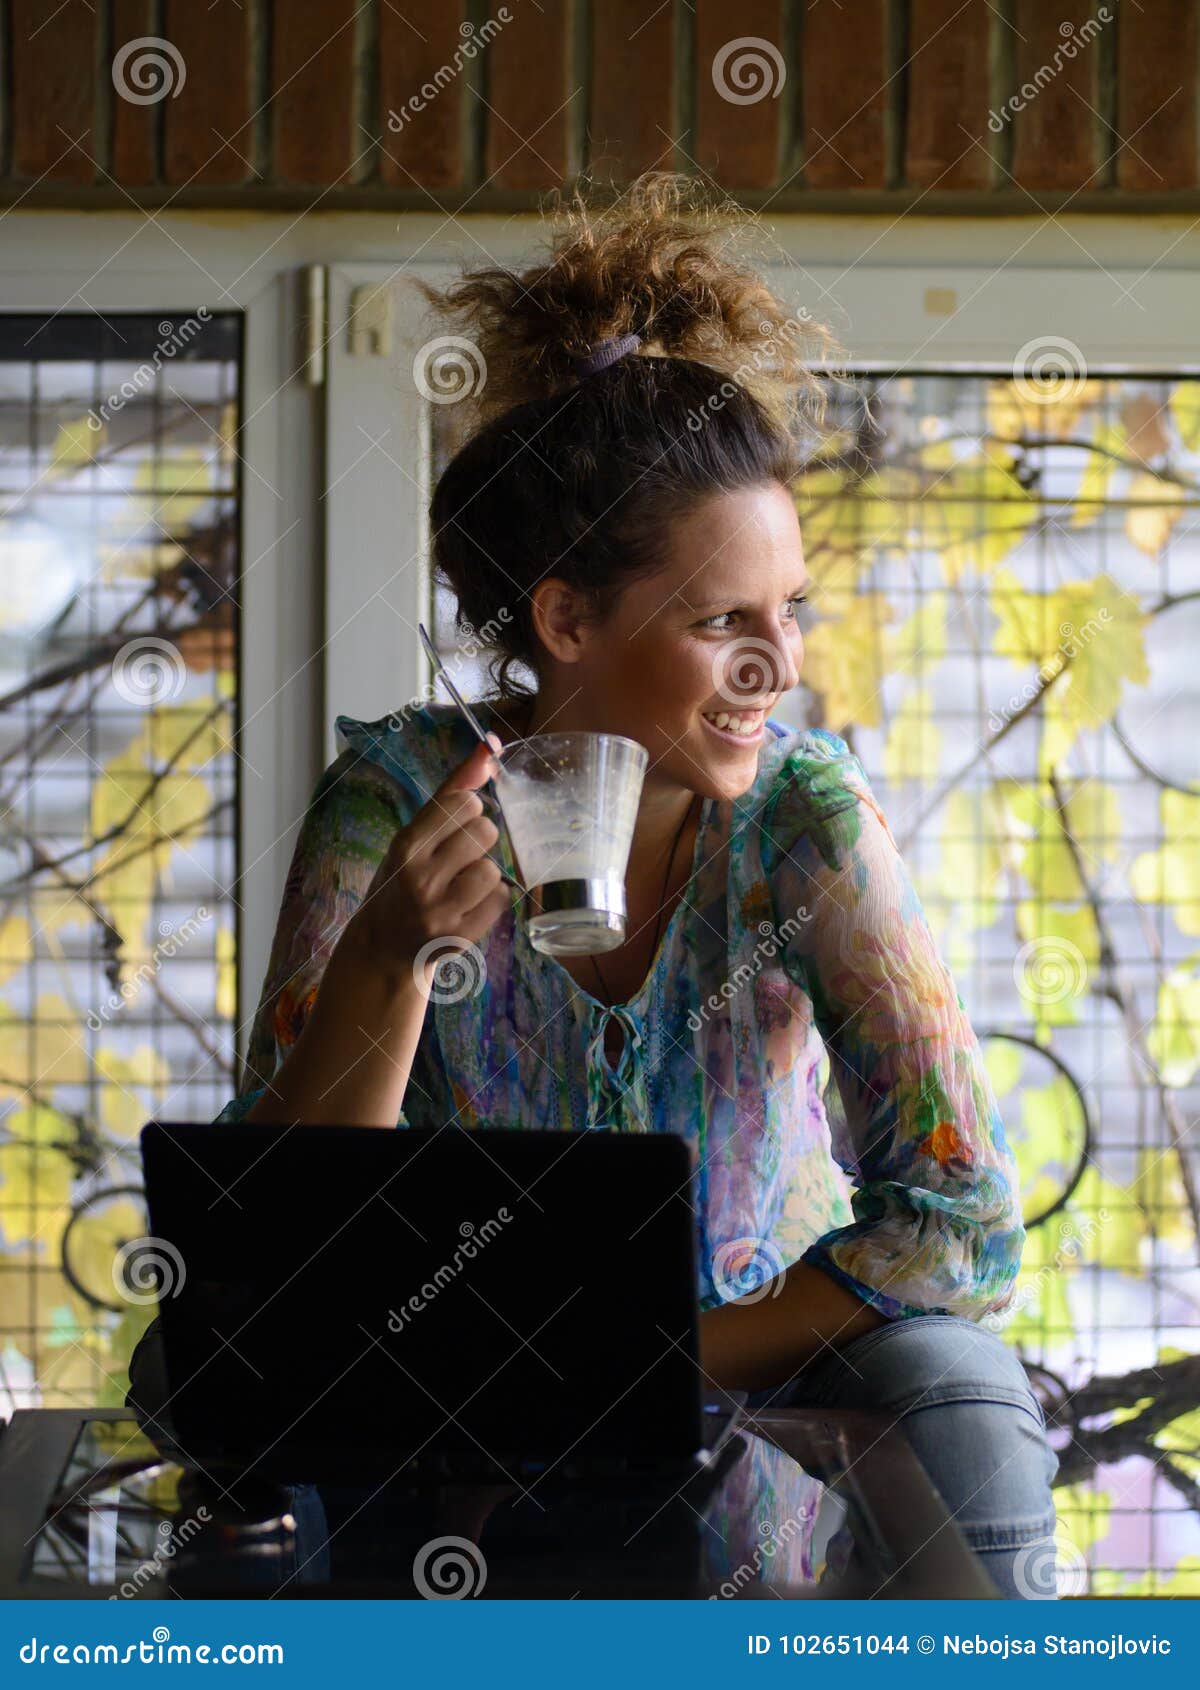 young woman portrait drinking cafee